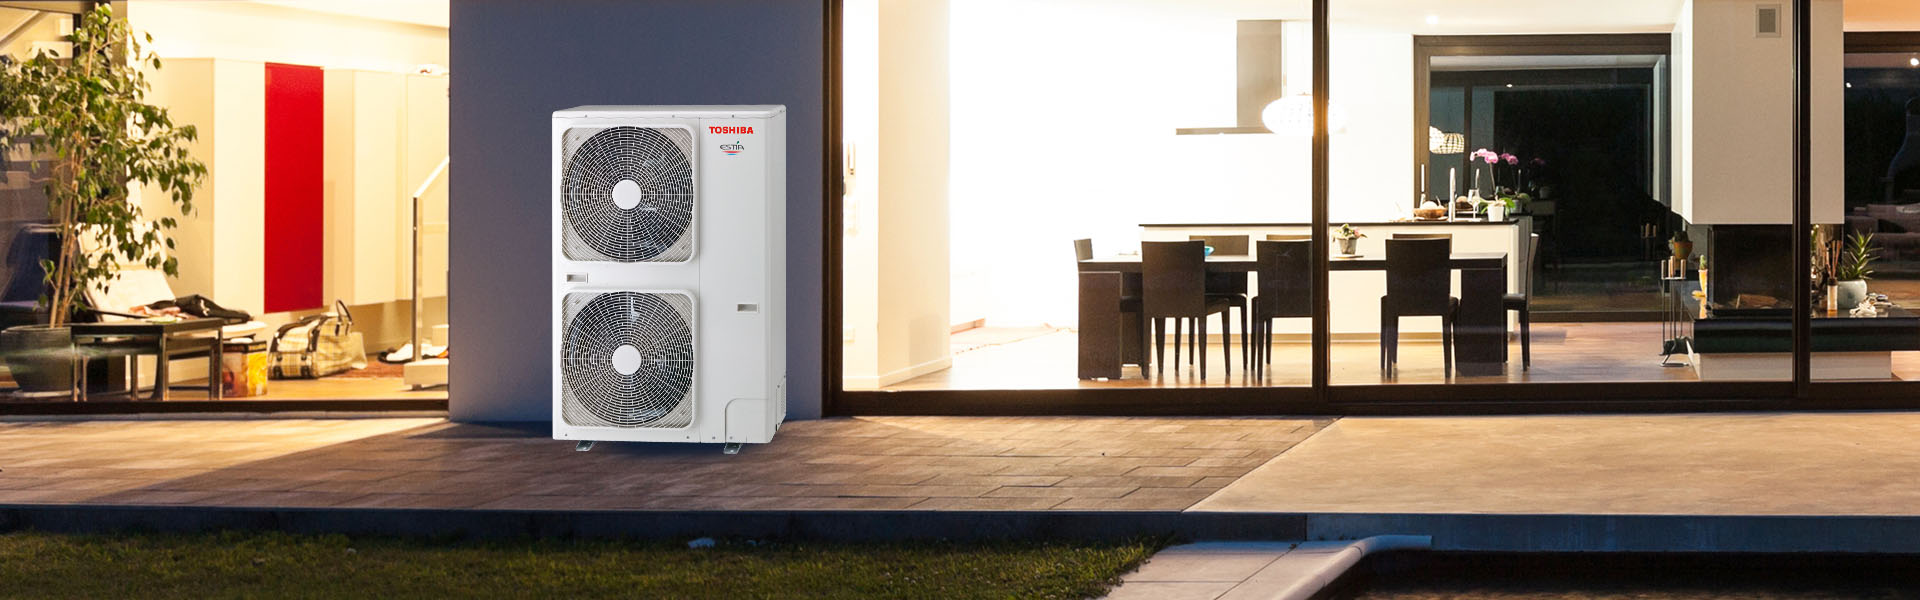 Heat Pumps: the most cost-efficient heating solution that respects the environment